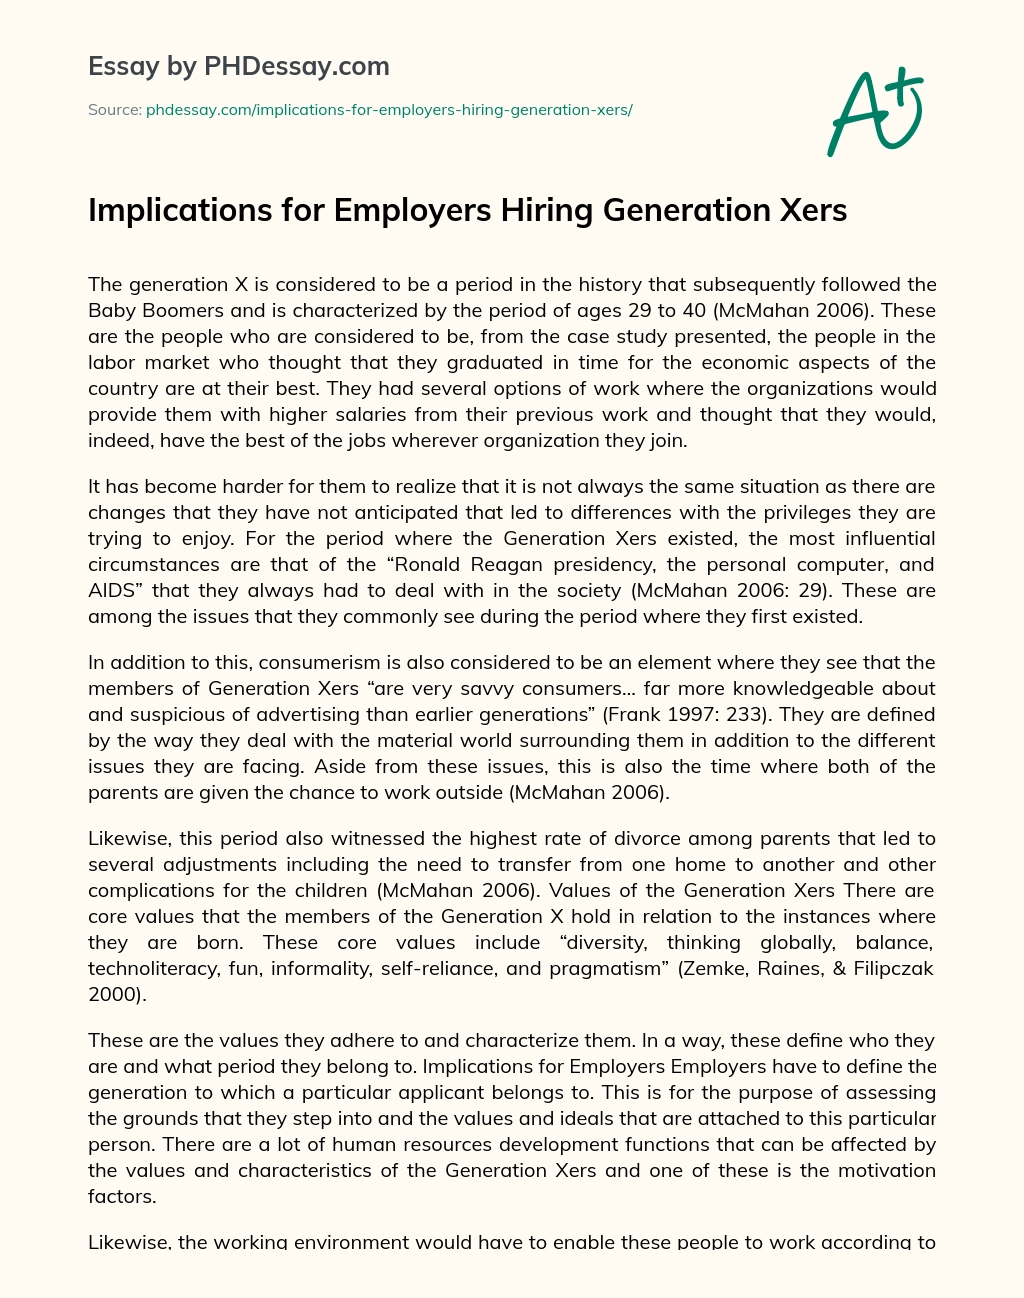 Implications for Employers Hiring Generation Xers essay